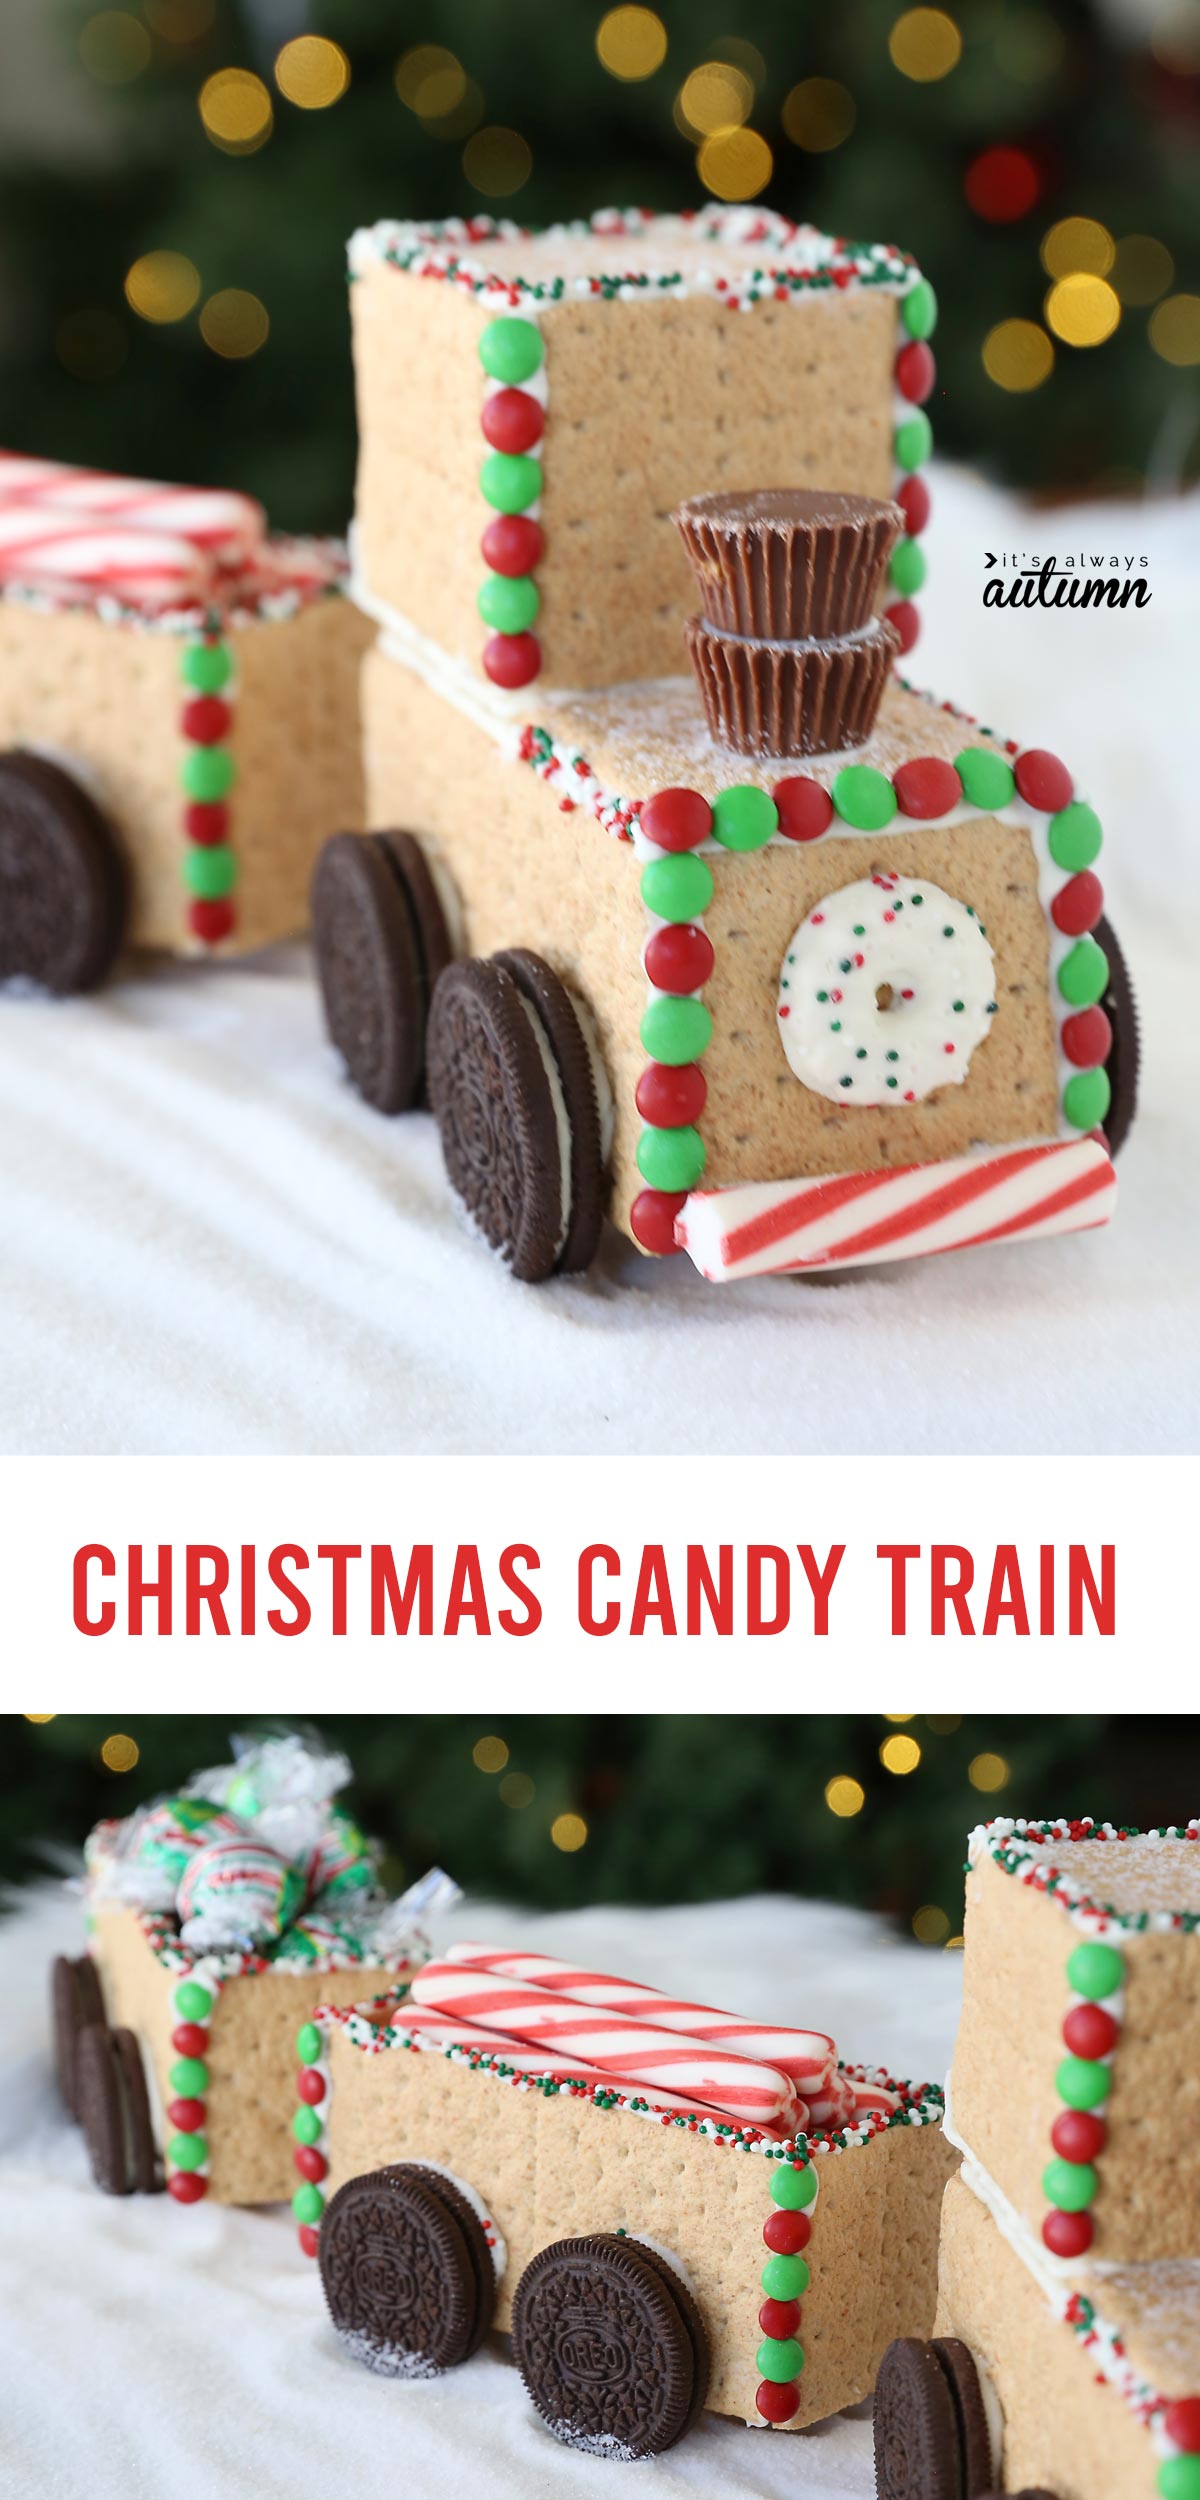 Candy train made from Graham crackers in front of a Christmas tree